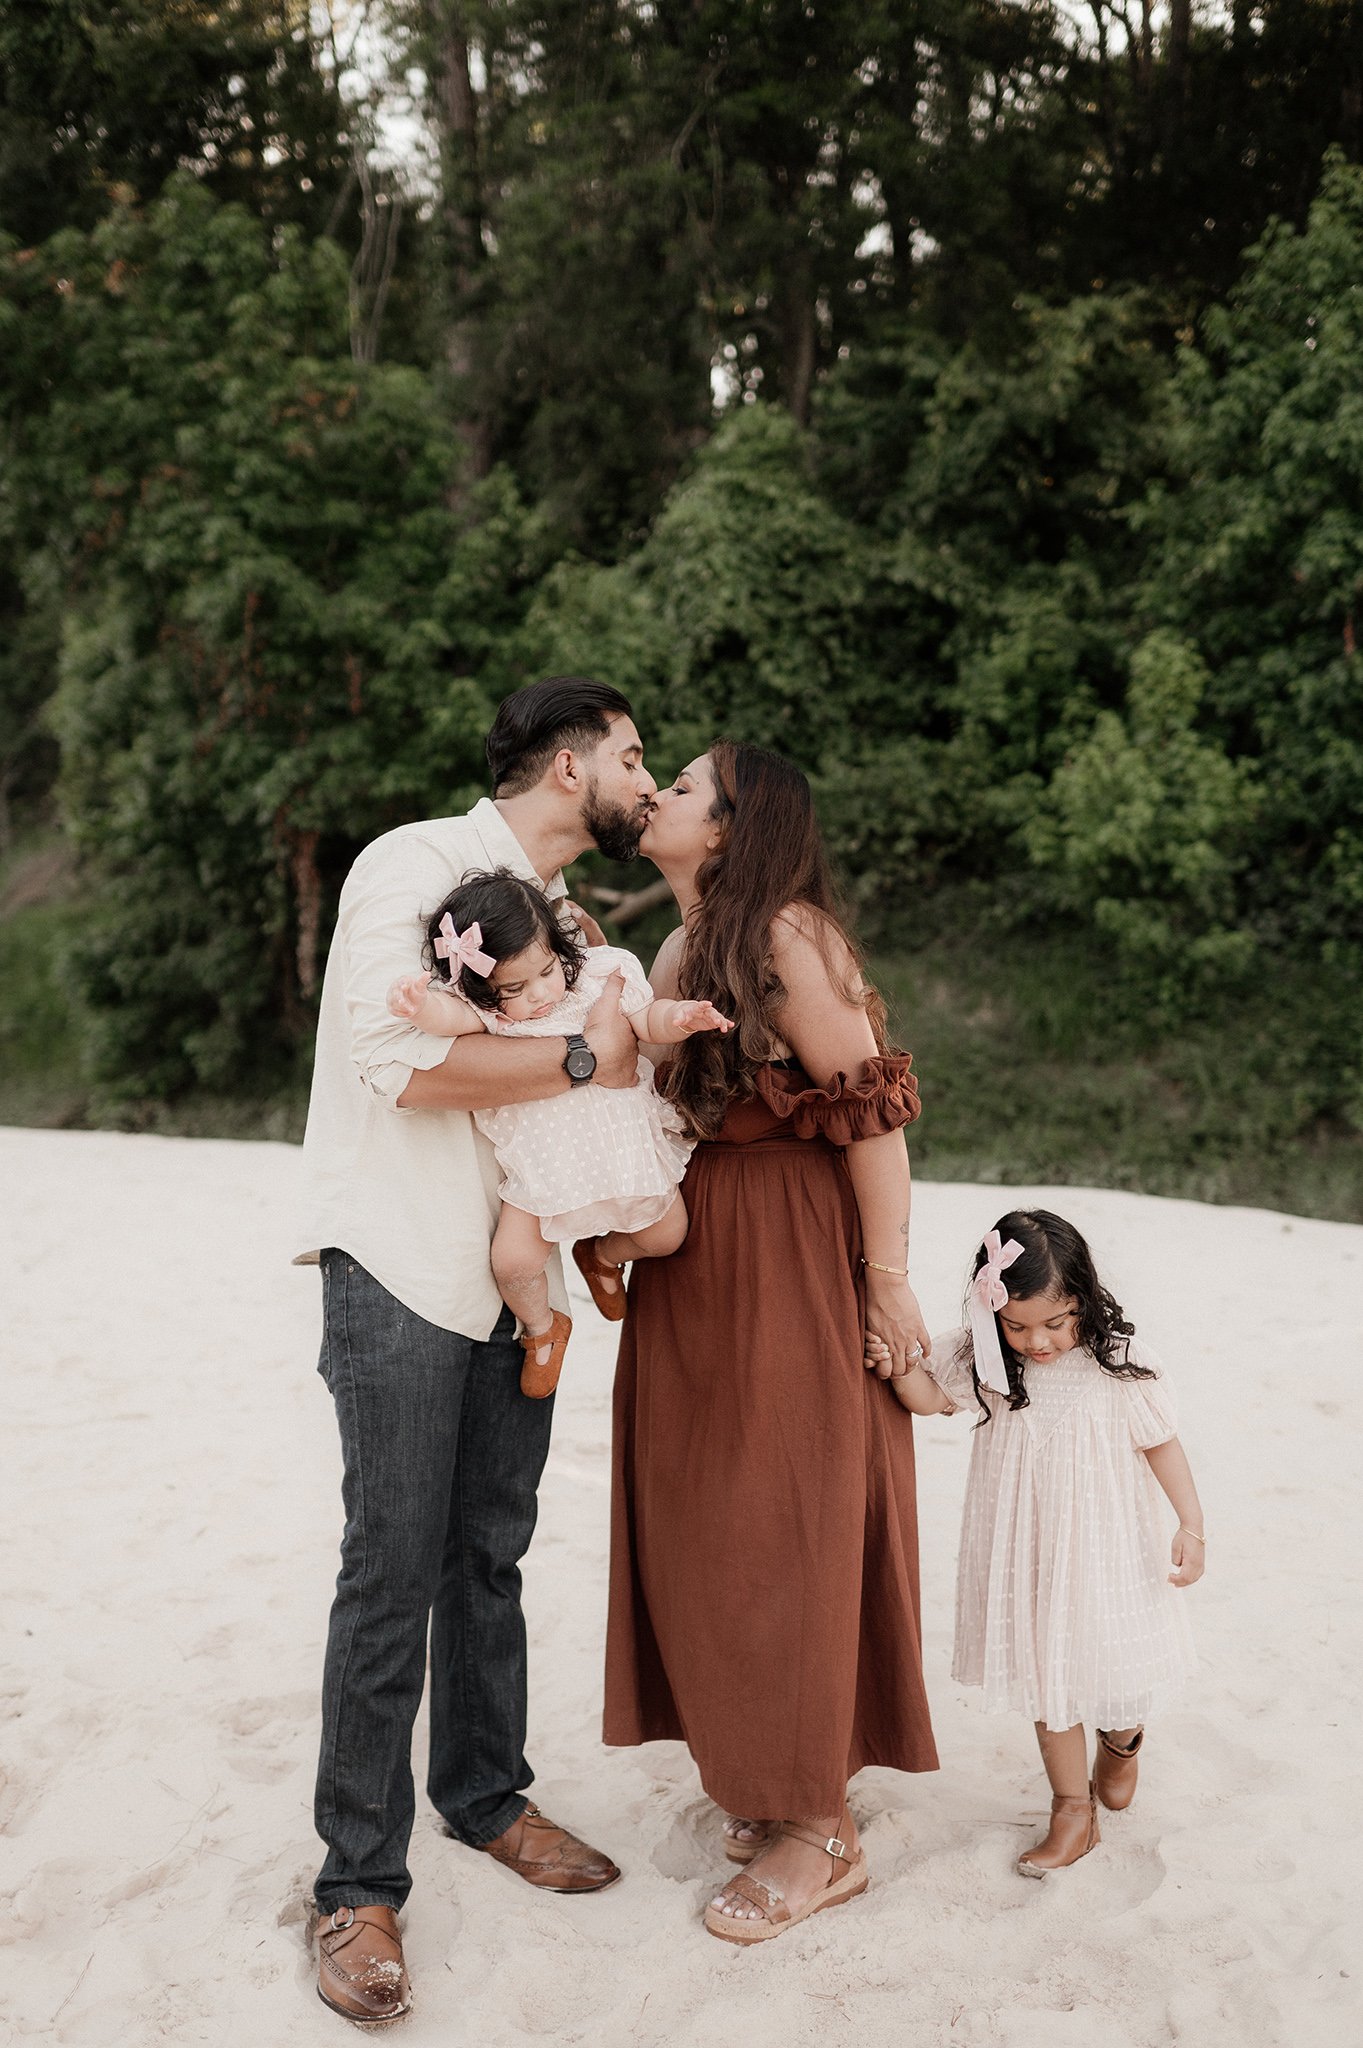 the woodlands family photographer _ conroe photographer _ houston family photographer _ ashley gillen photography _ texas family photographer _ conroe wedding photographer _ conroe texas _ cshi44.jpg